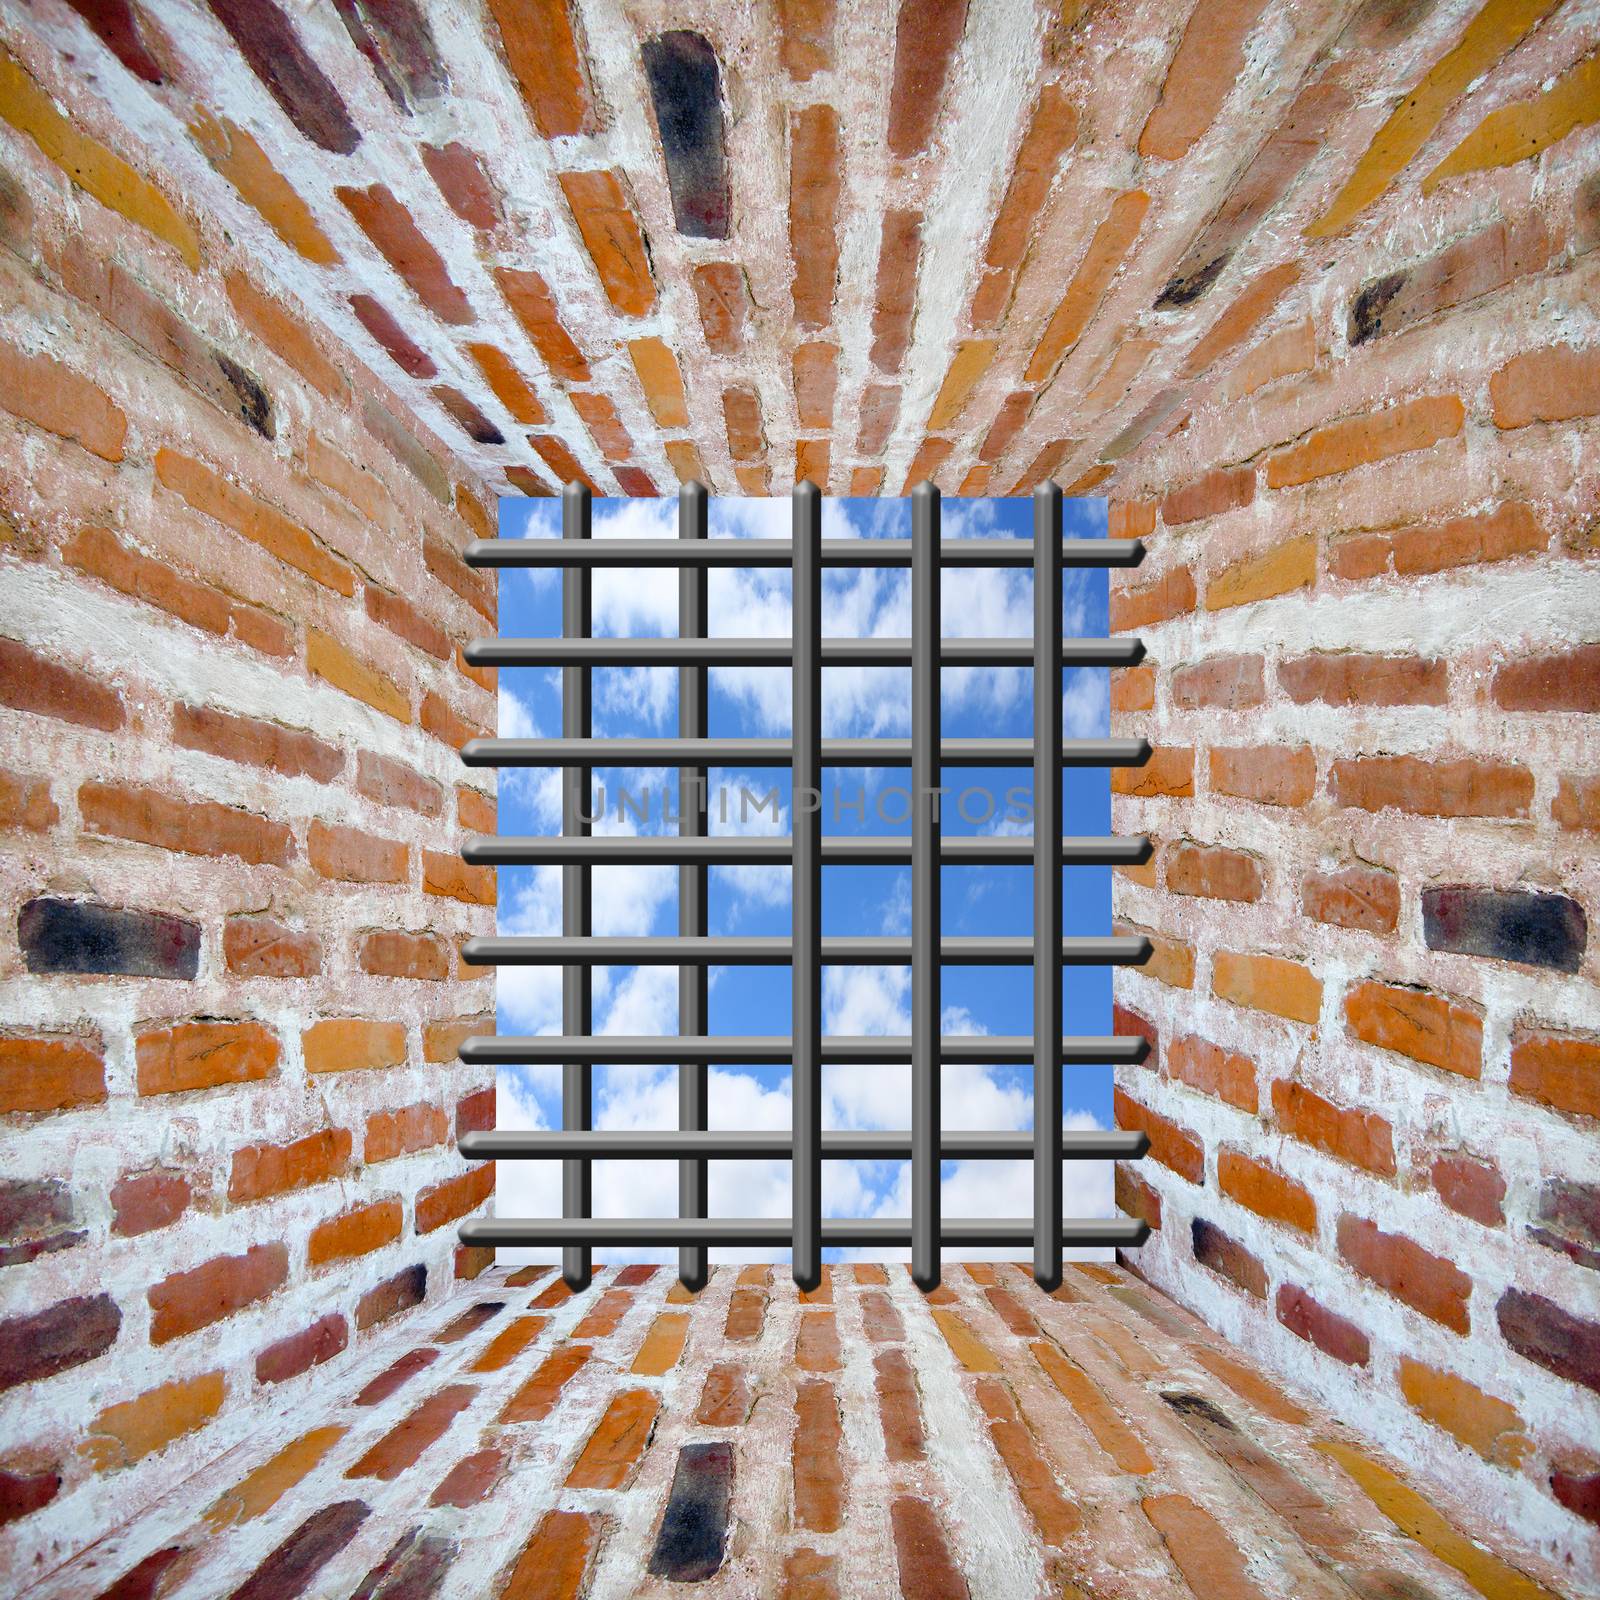 Prison's window and bars in wall from brick by alexmak